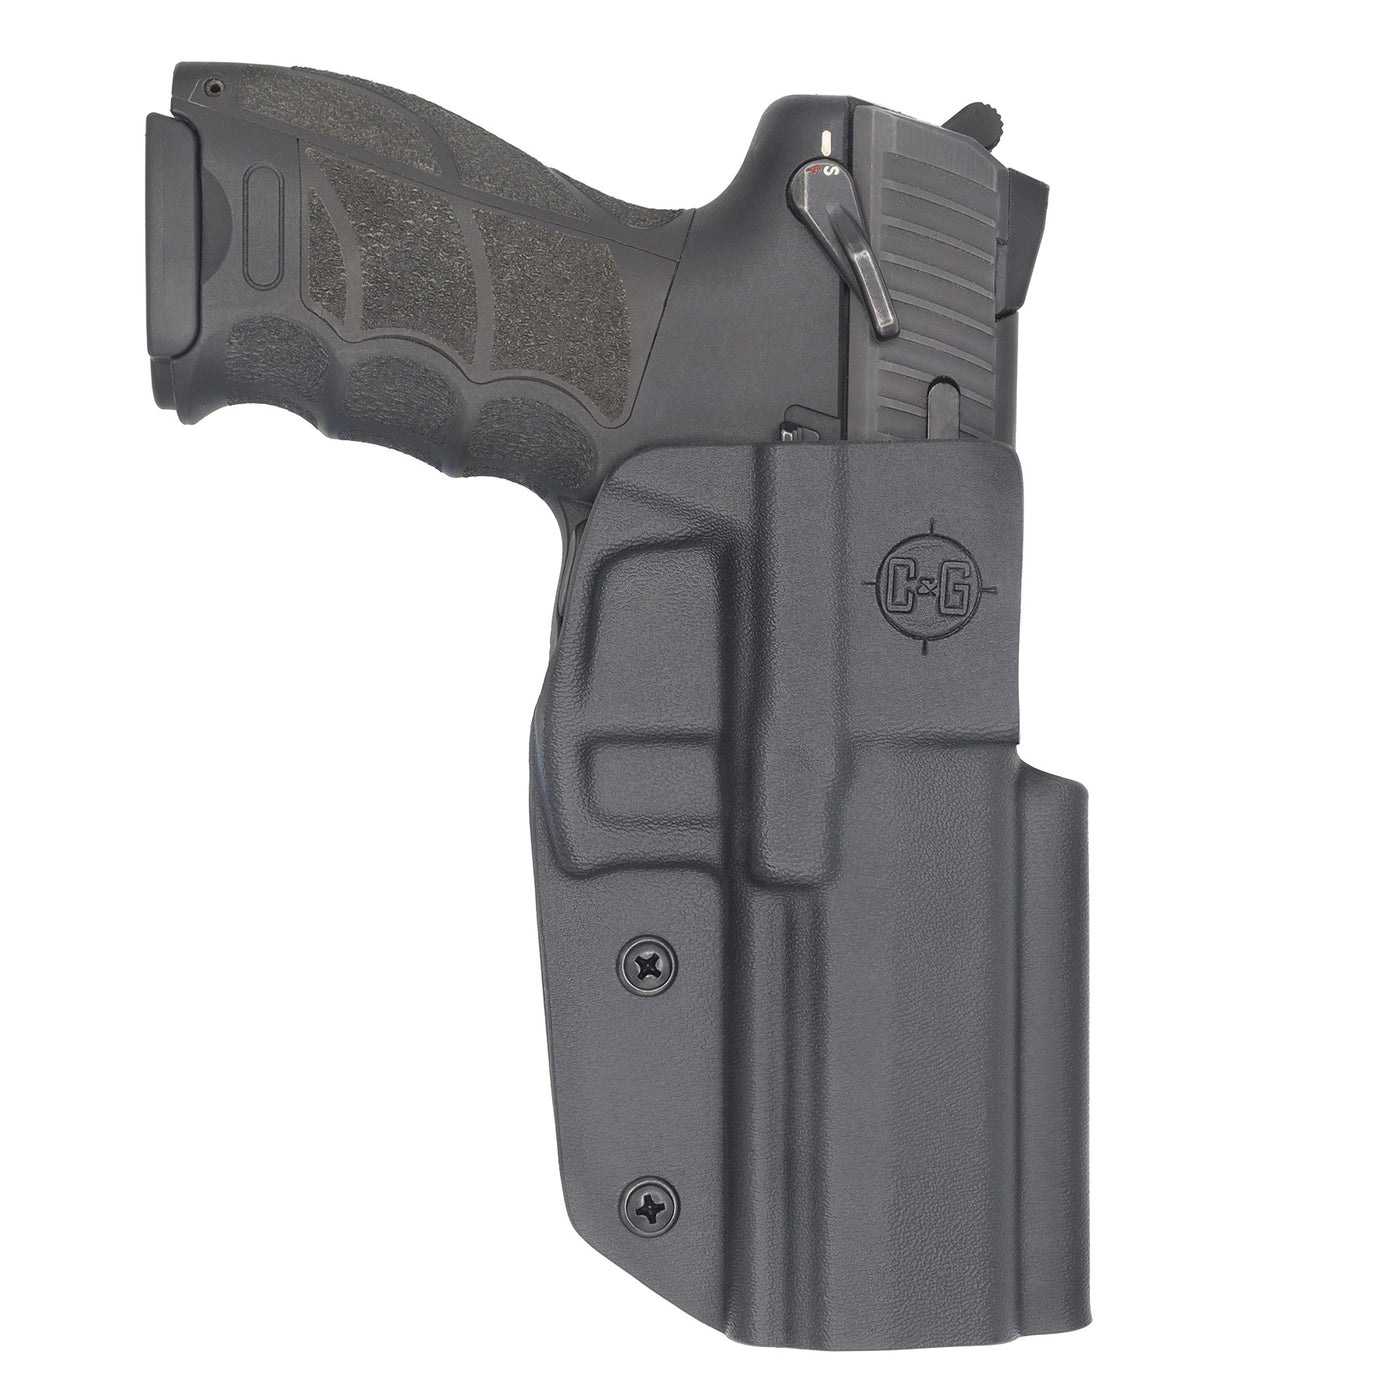 Heckler & Koch P30L Compitetion holster for USPSA, IDPA and 3-Gun. With Gun Front View.